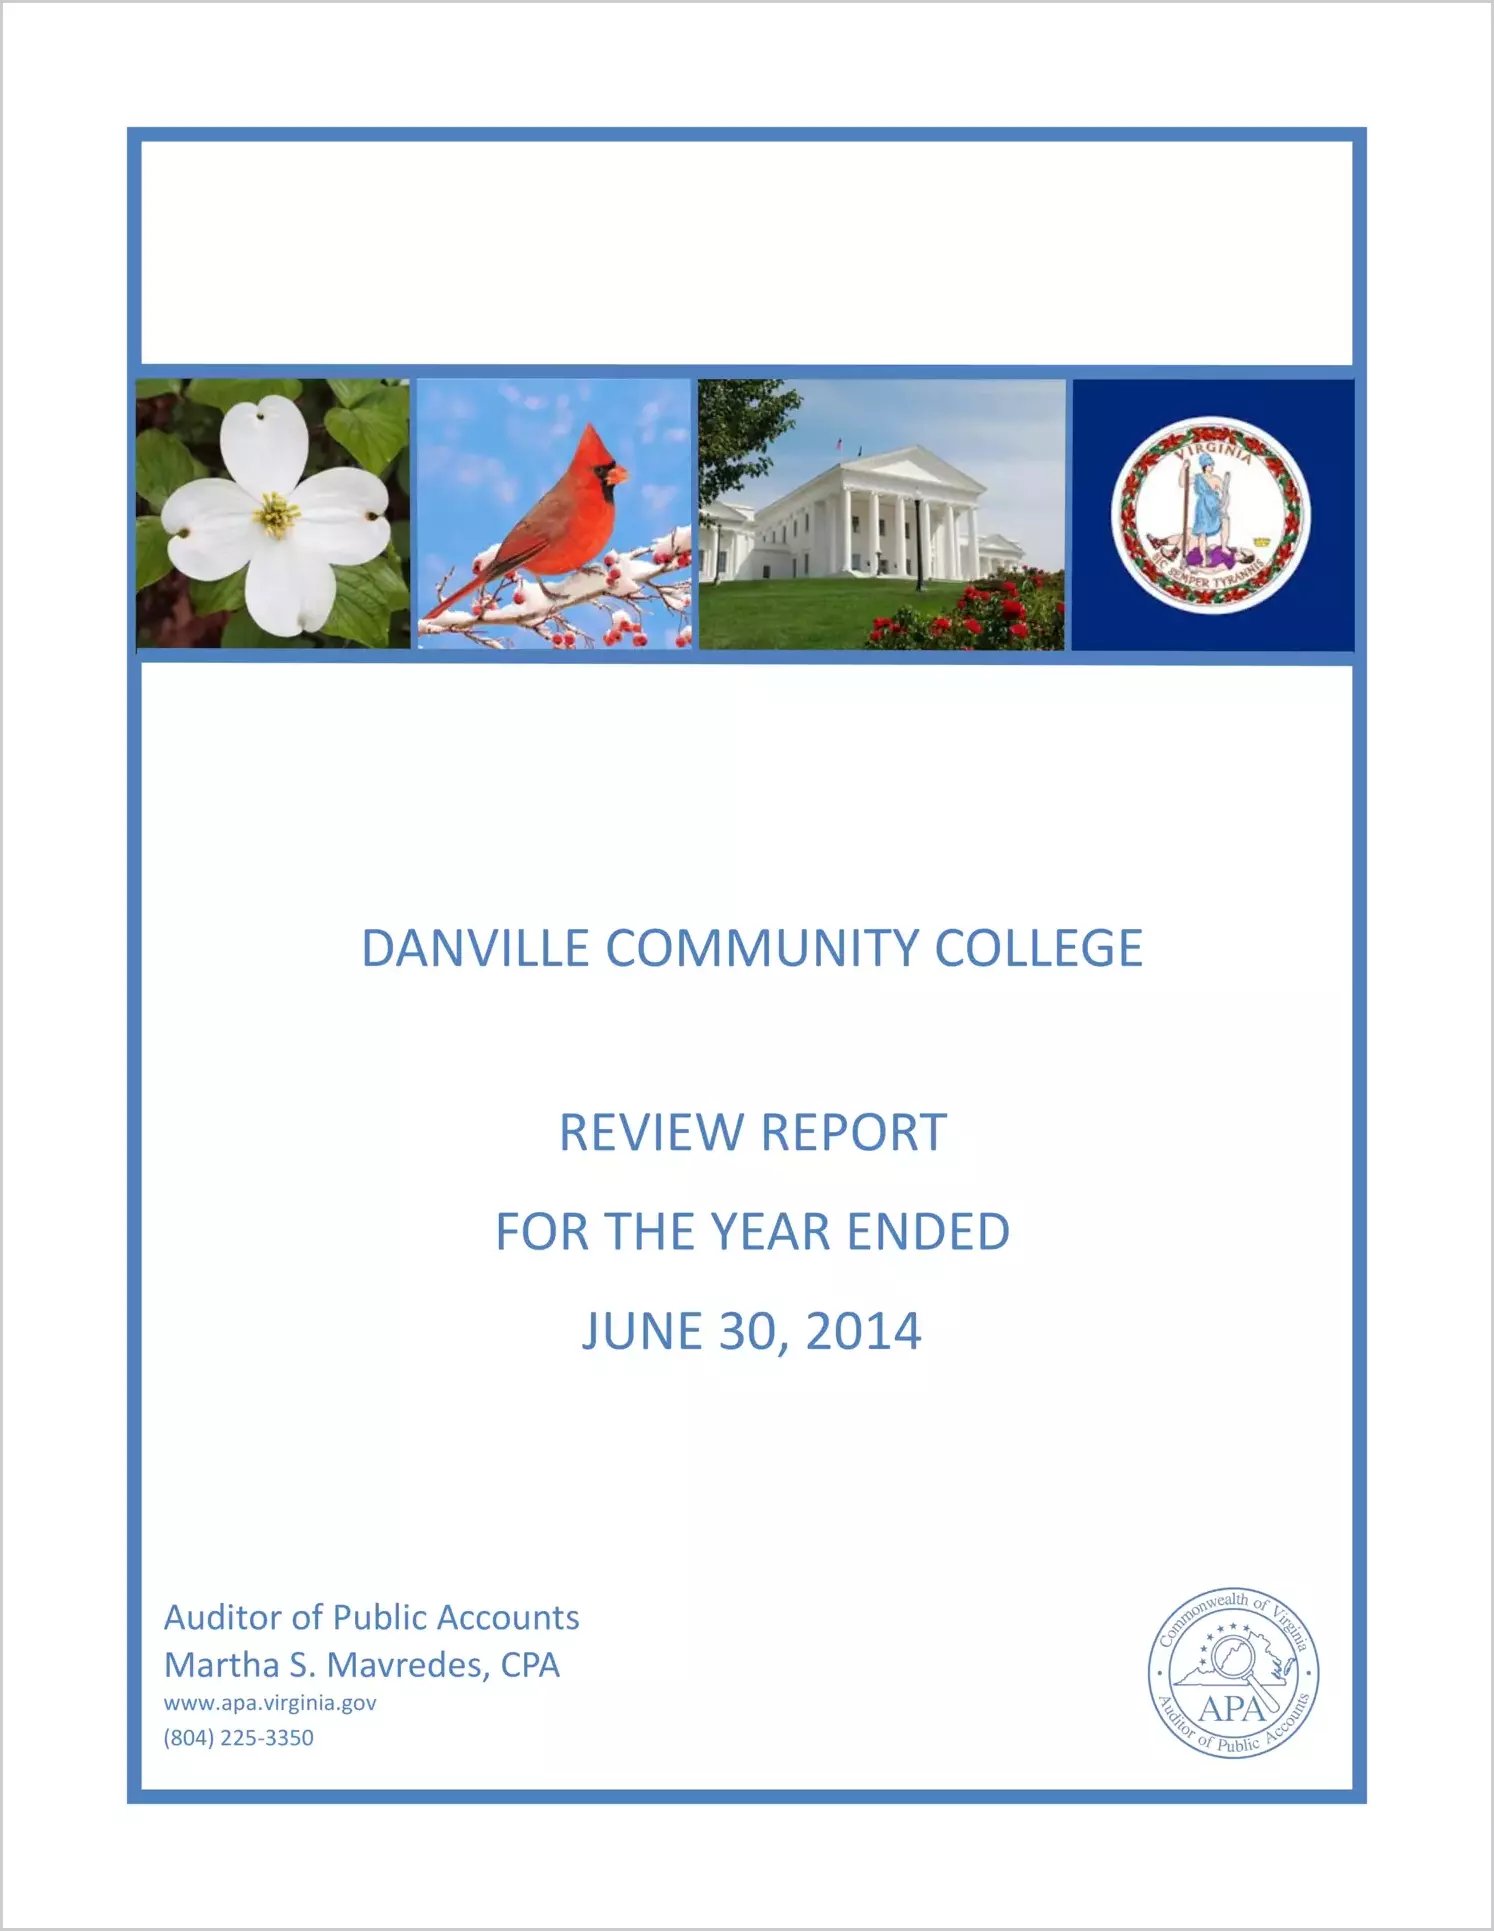 Danville Community College Review Report for the year ended June 30, 2014